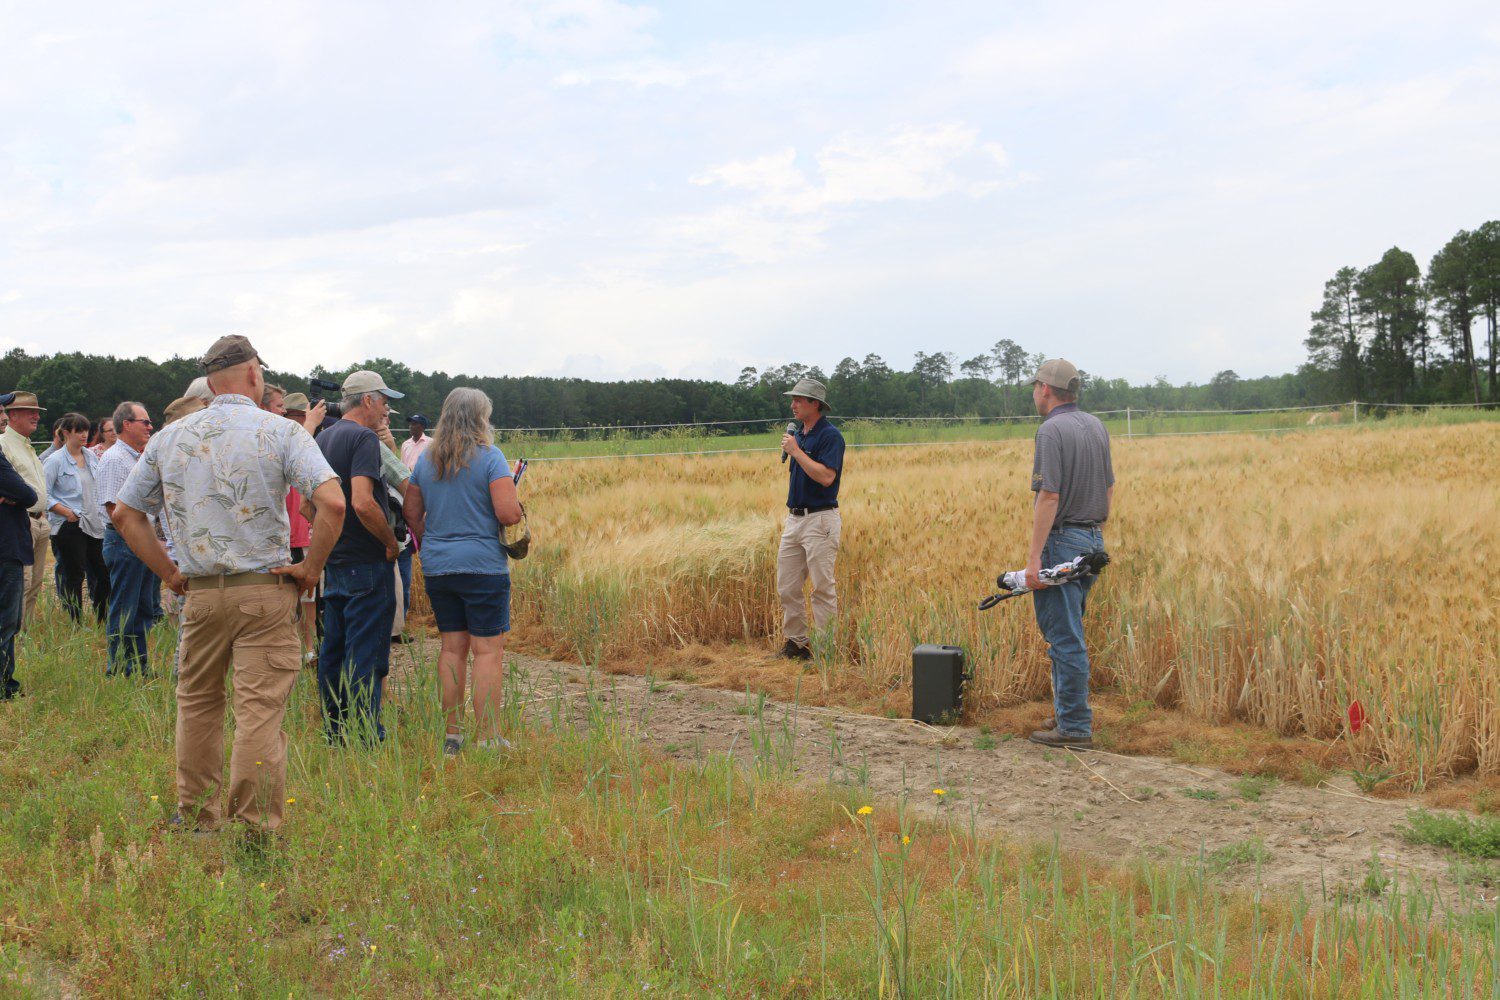 Rick Boyles, a research scientist at Clemson’s Pee Dee Research and Education Center, talks about how a combination of traditional and advanced plant genetic approaches are being used to determine which grain lines are best adapted to South Carolina and the entire southeastern United States.